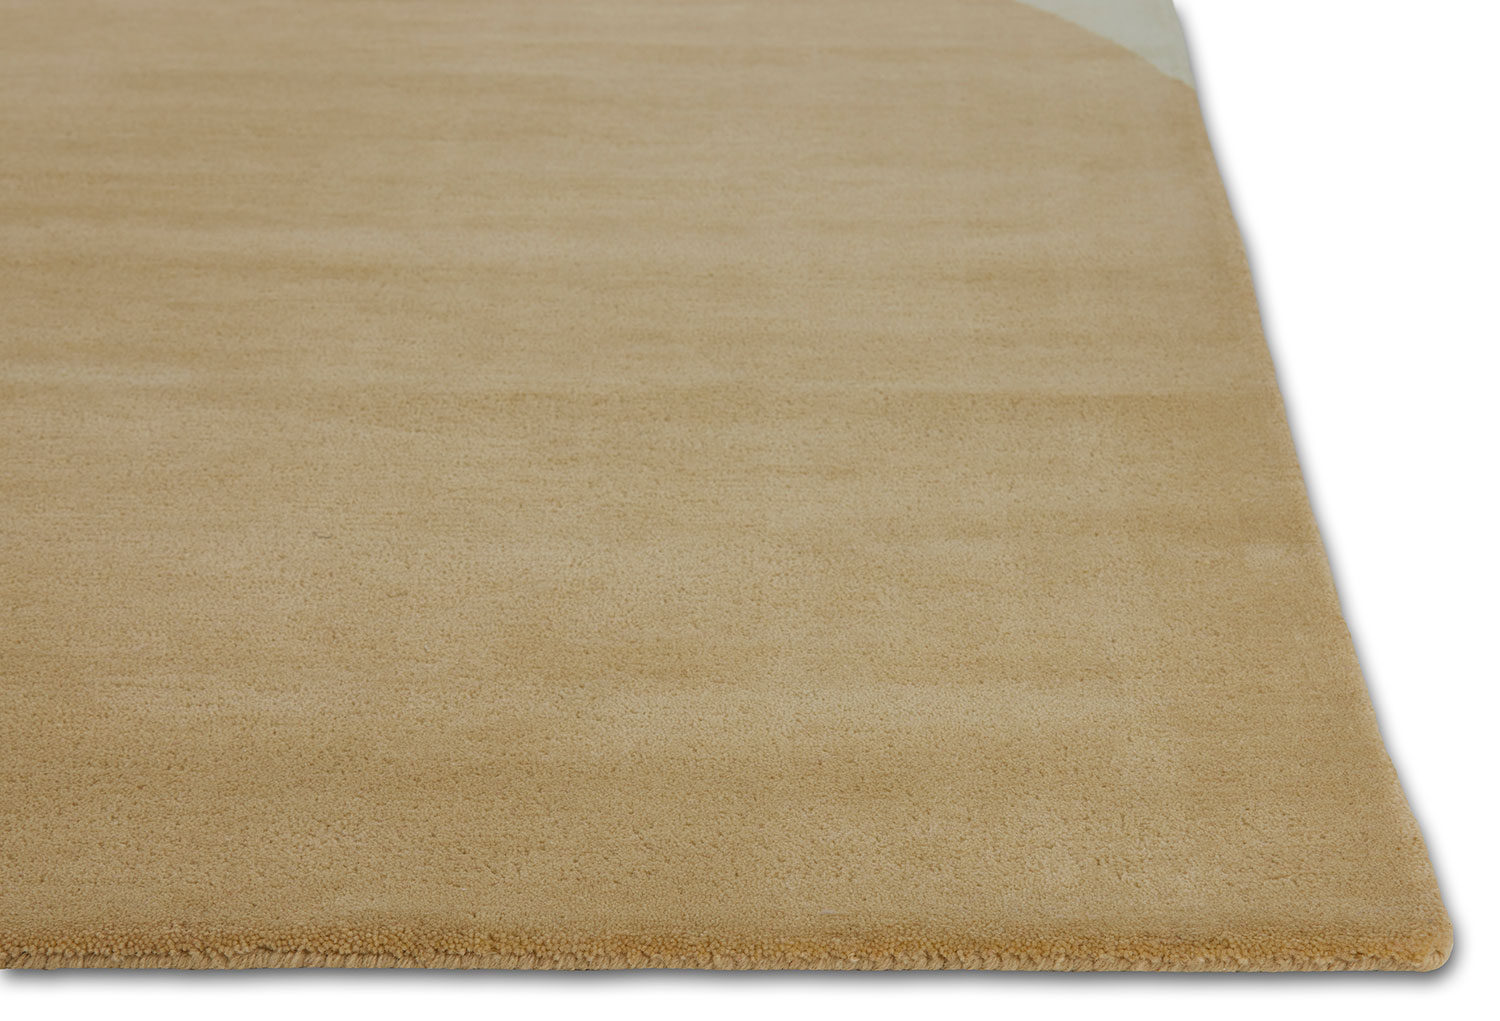 A Beige colored close up of an area rug called Dove Peace by angela adams